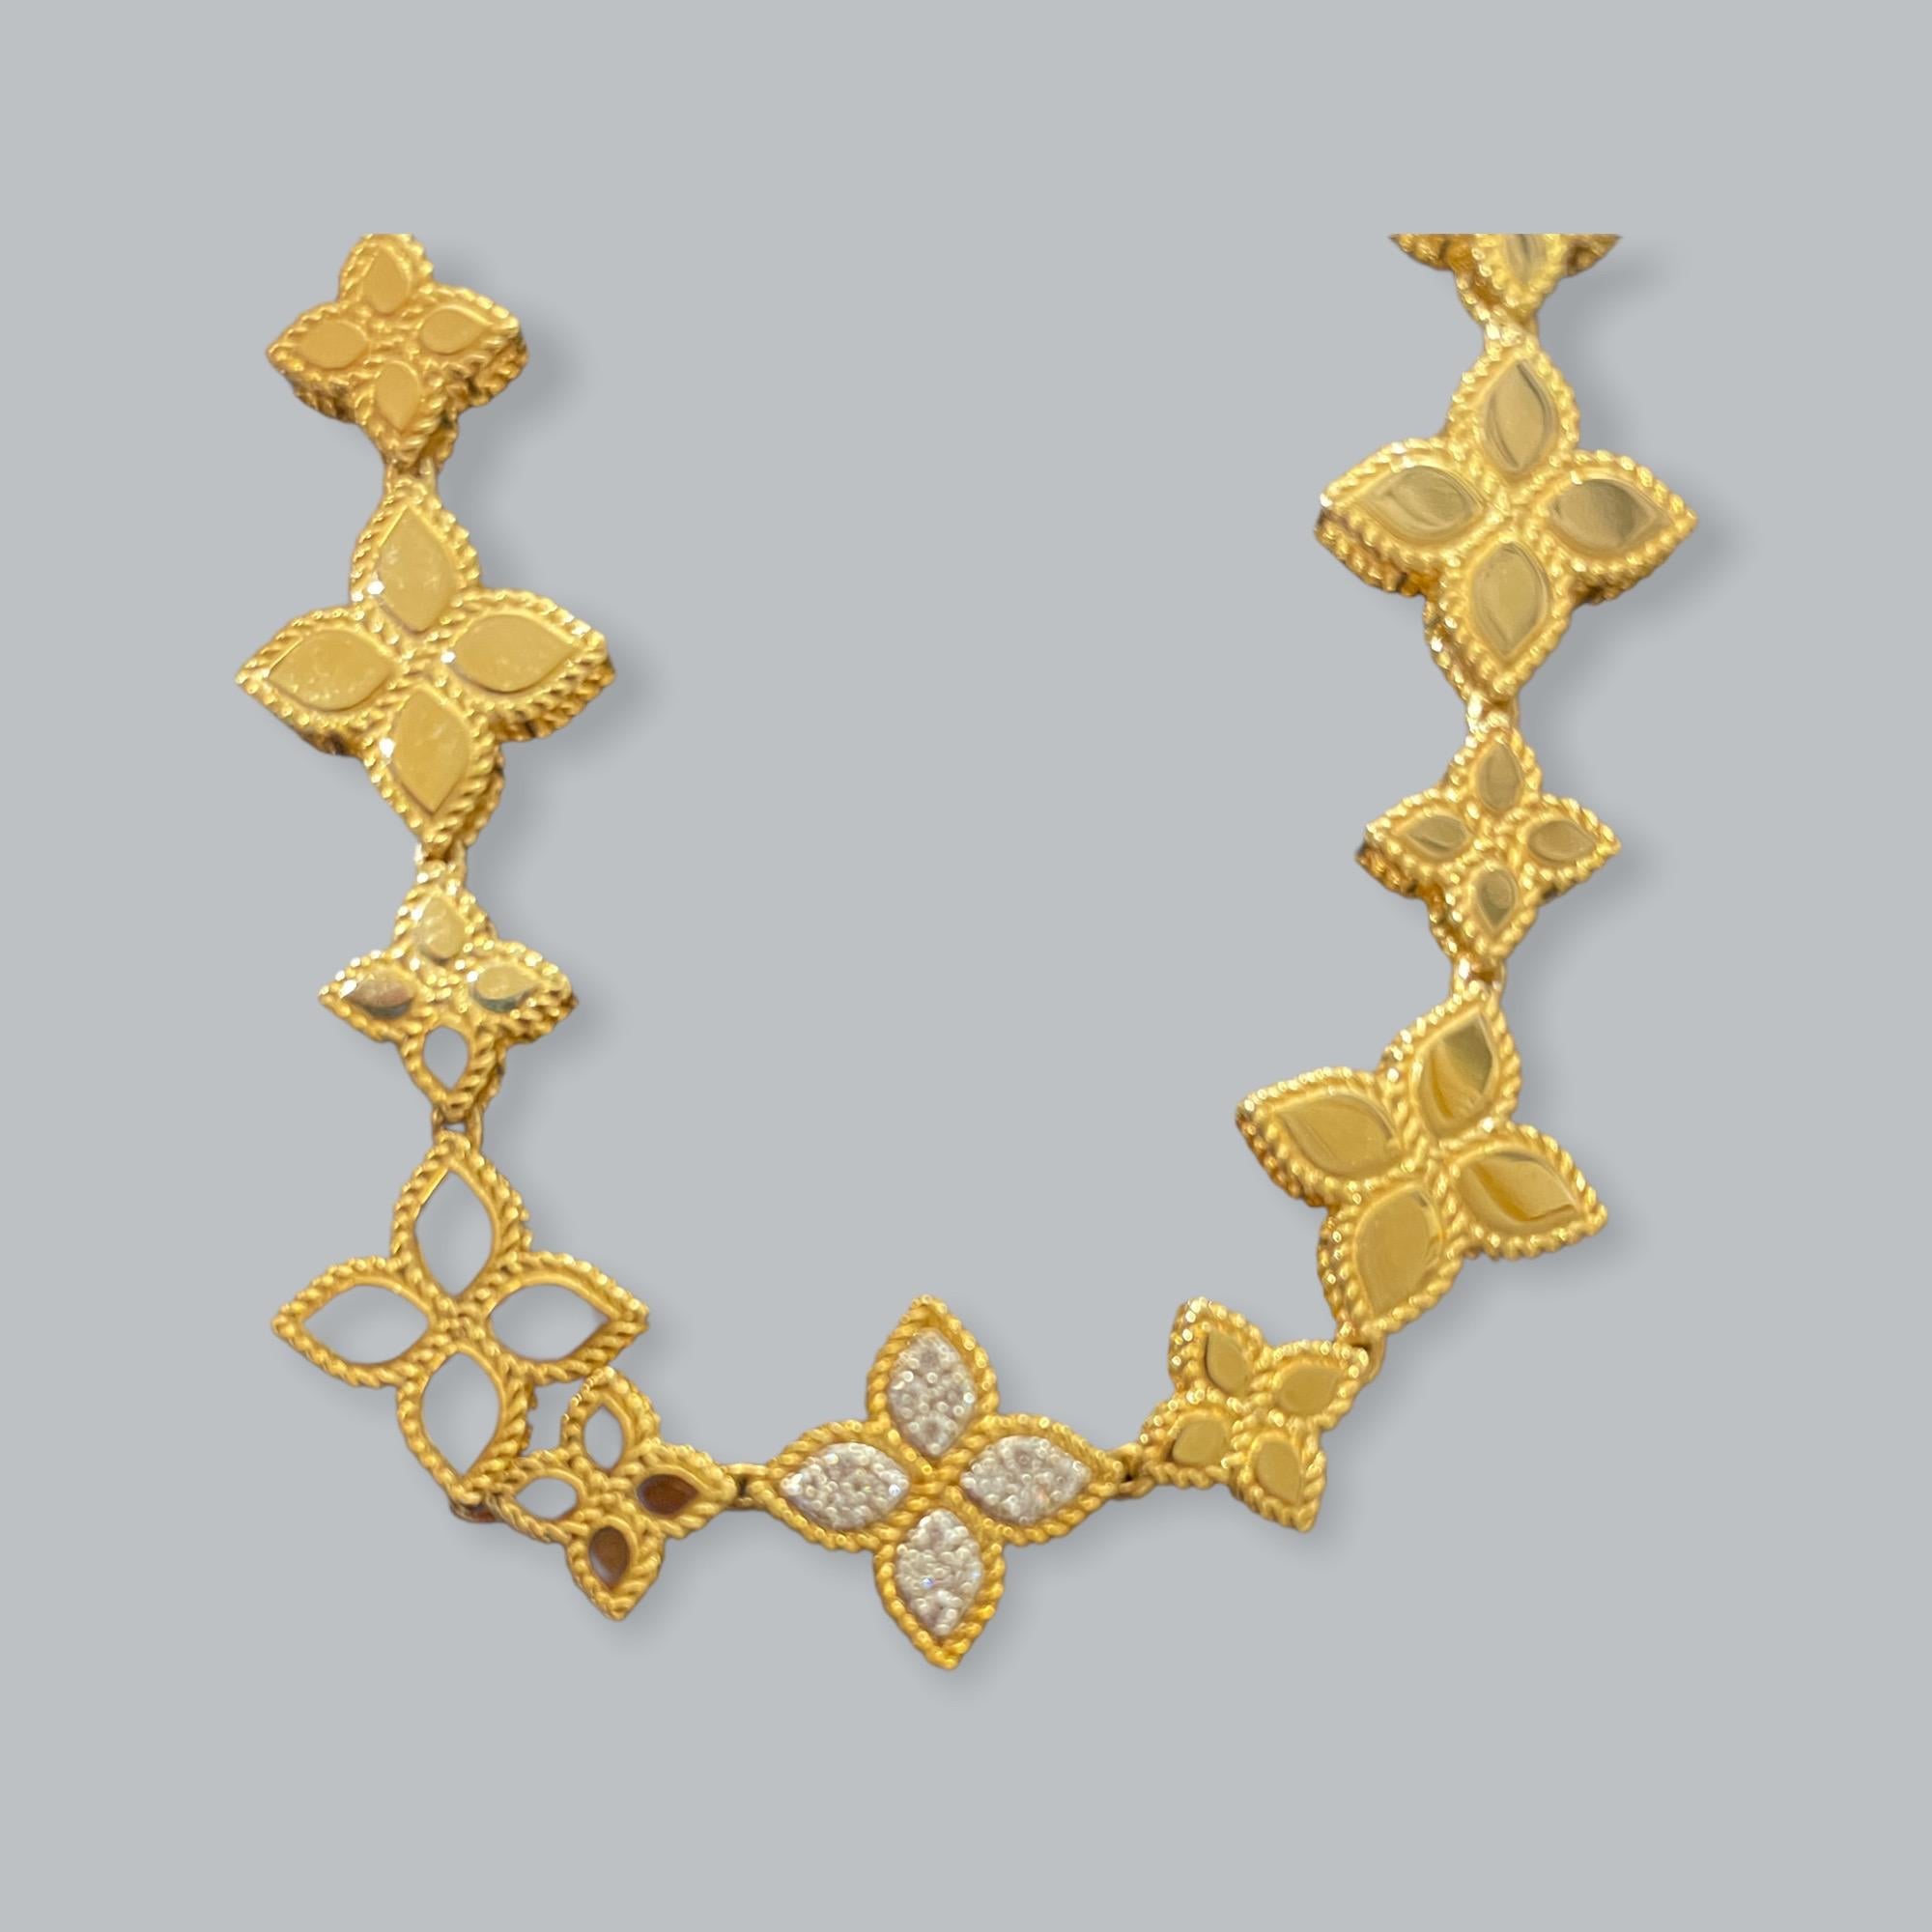 Each item in Roberto Coin's Princess collection is hand-chiseled into a regal design. 
Crafted in 18kt yellow gold this floral-motif necklace is fashionable and feminine.
Accented with .18cts of diamonds.
